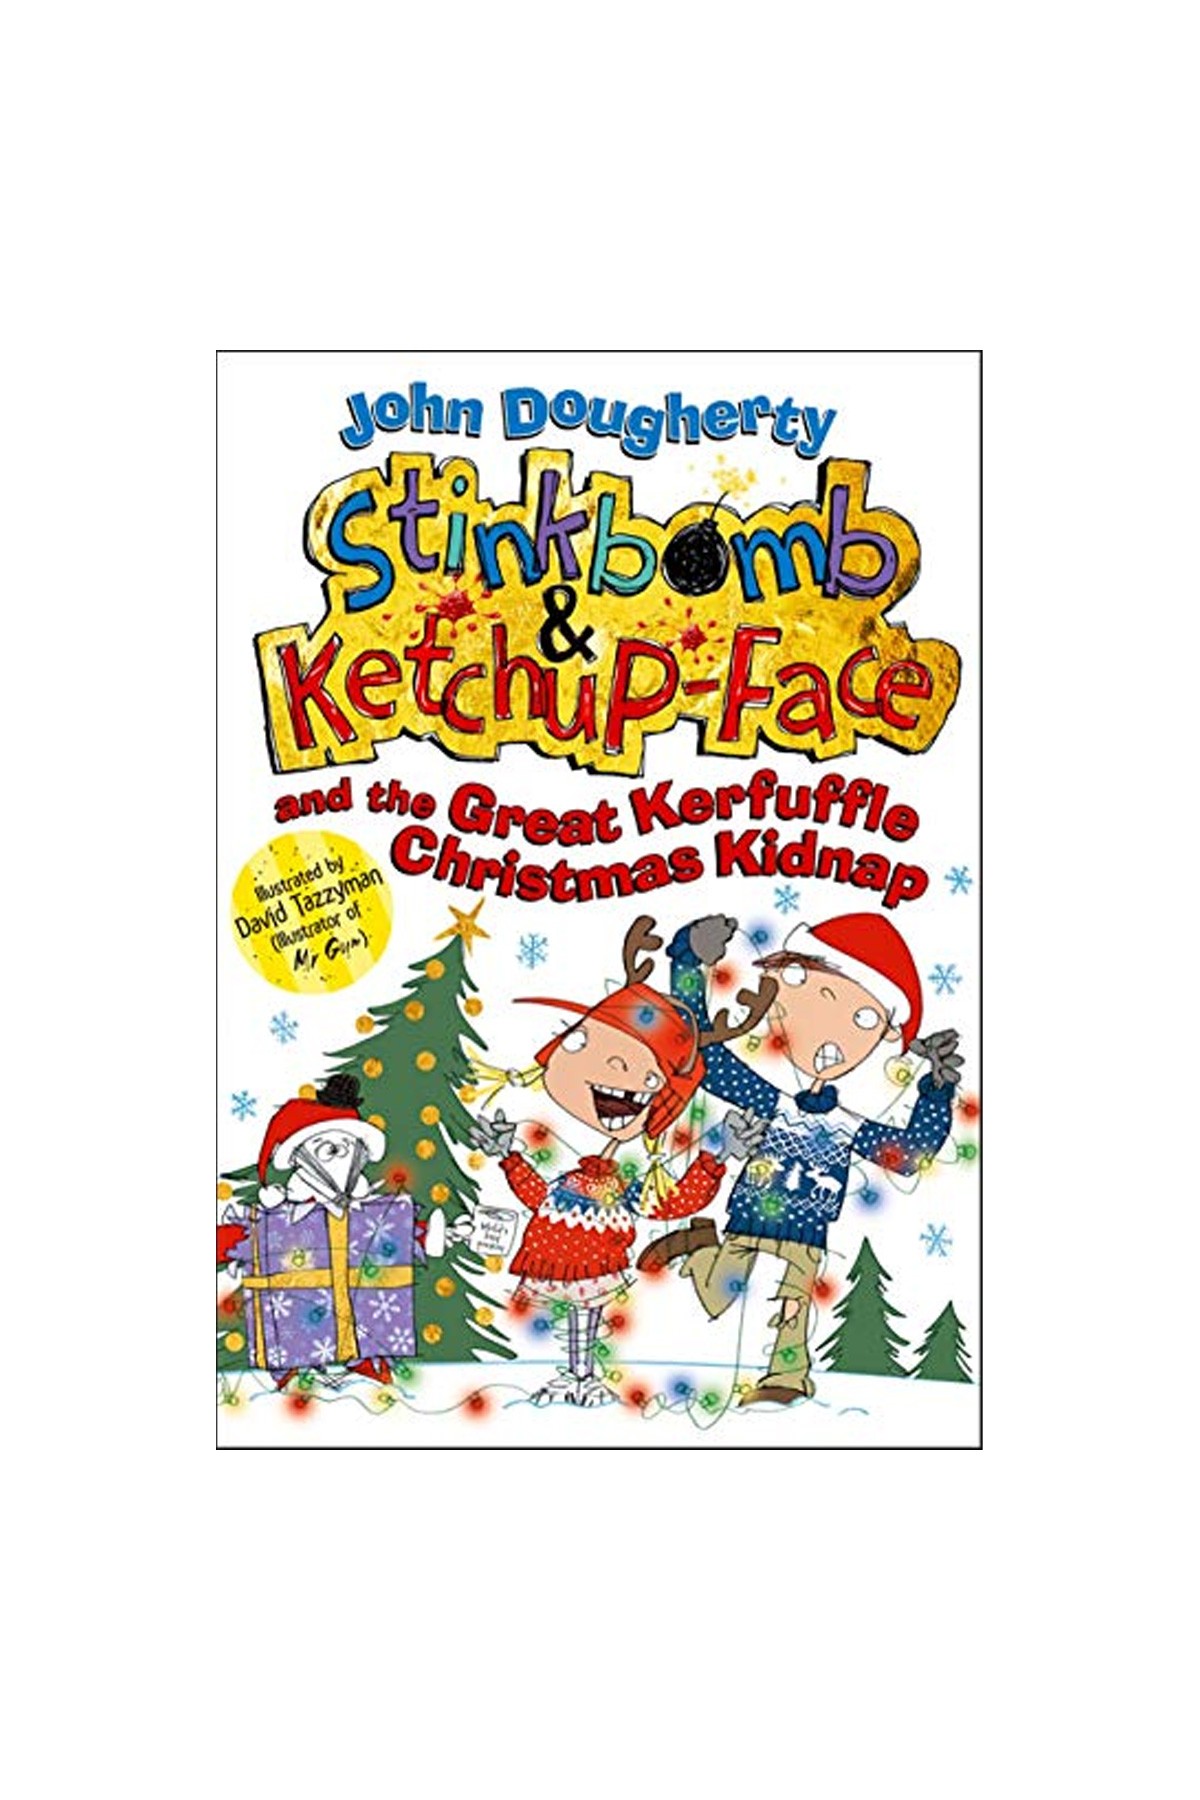 Oxford Childrens Book - Stinkbomb And Ketchup-Face And The Great Kerfuffle Christmas Kidnap